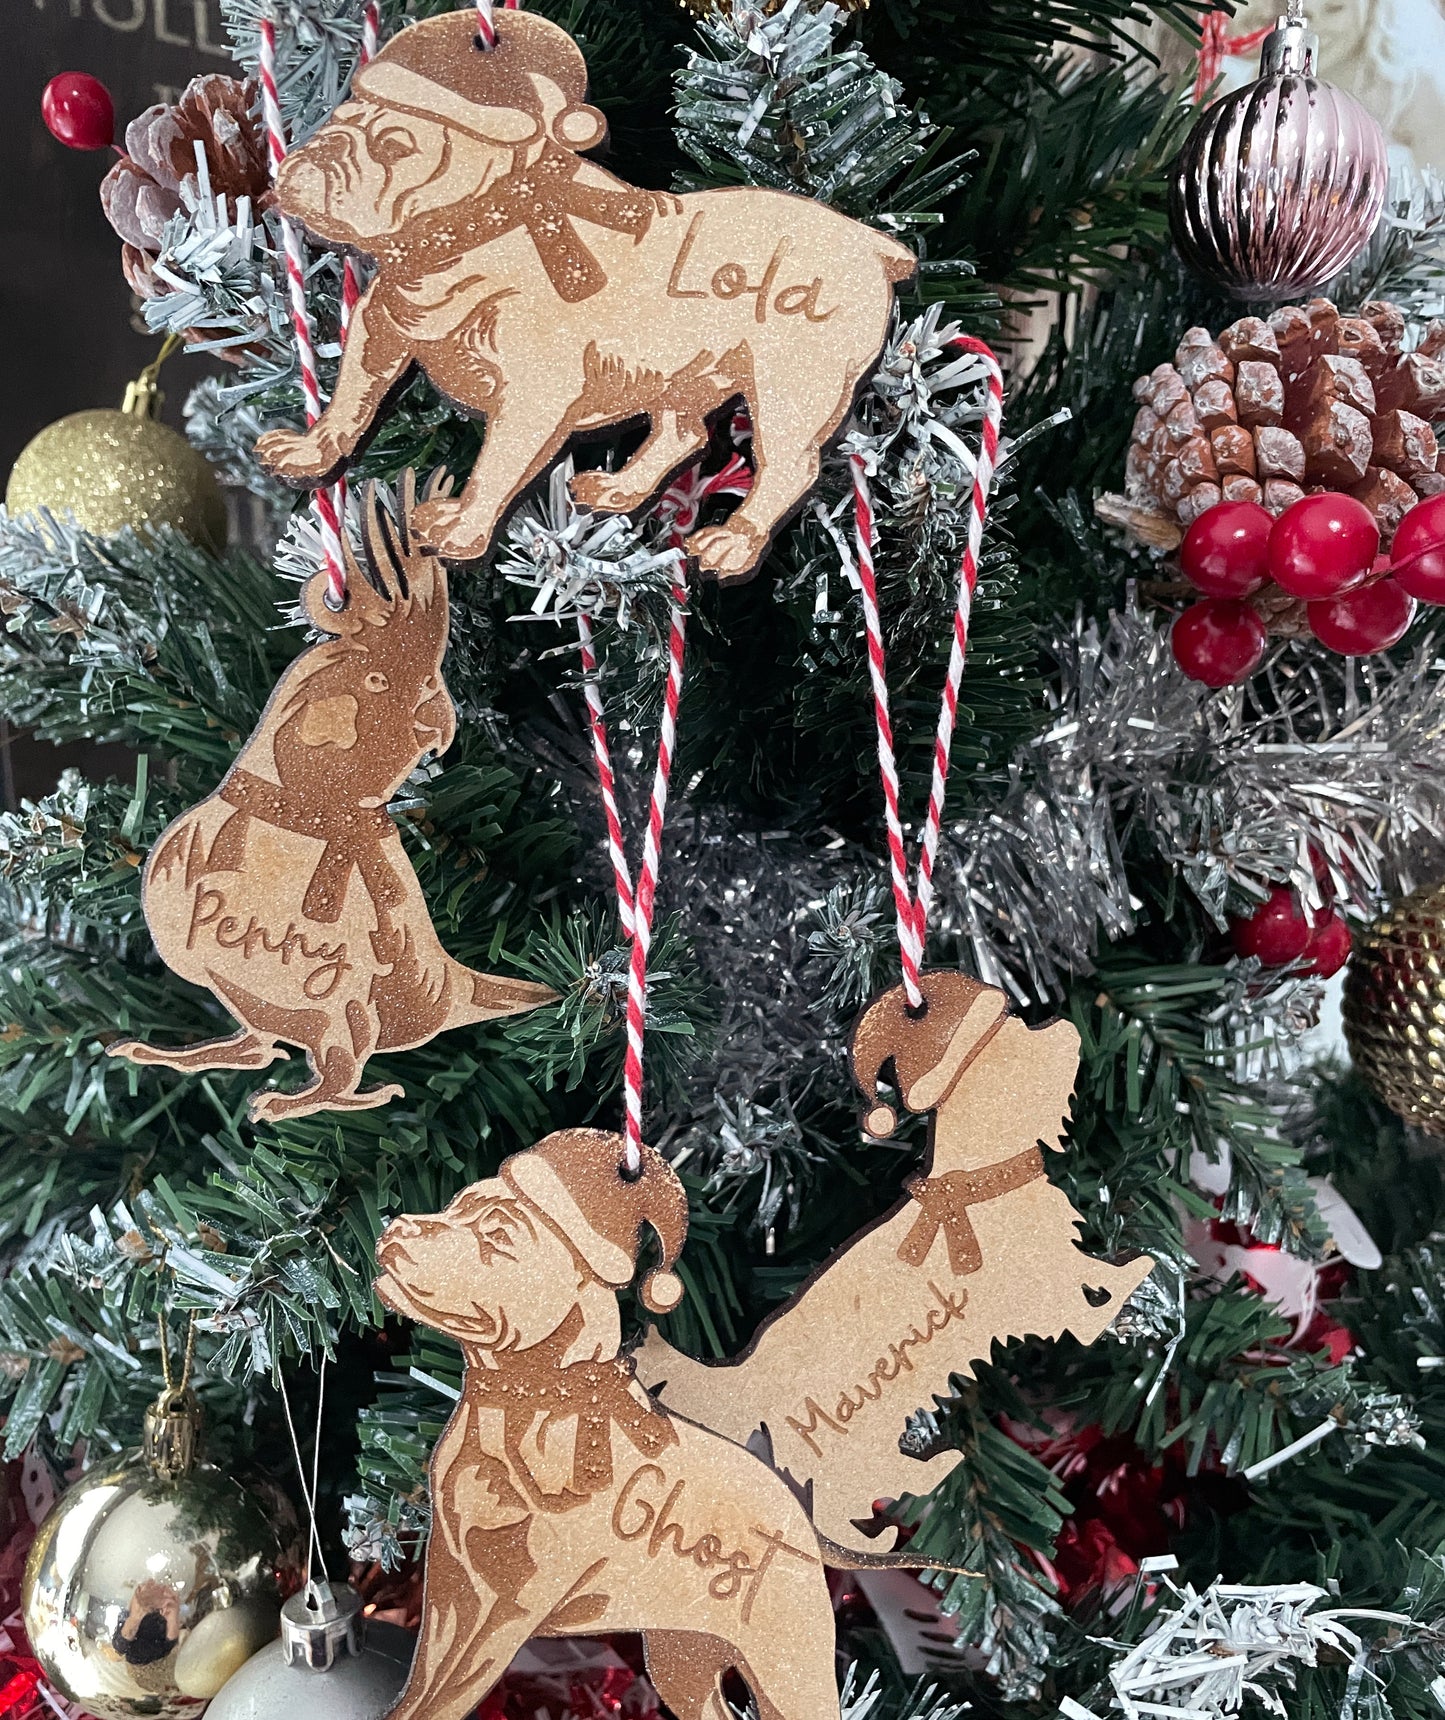 Personalised Pet shaped decorations - designed to a specific pet breed. Eg. yorkie, sausage dog etc